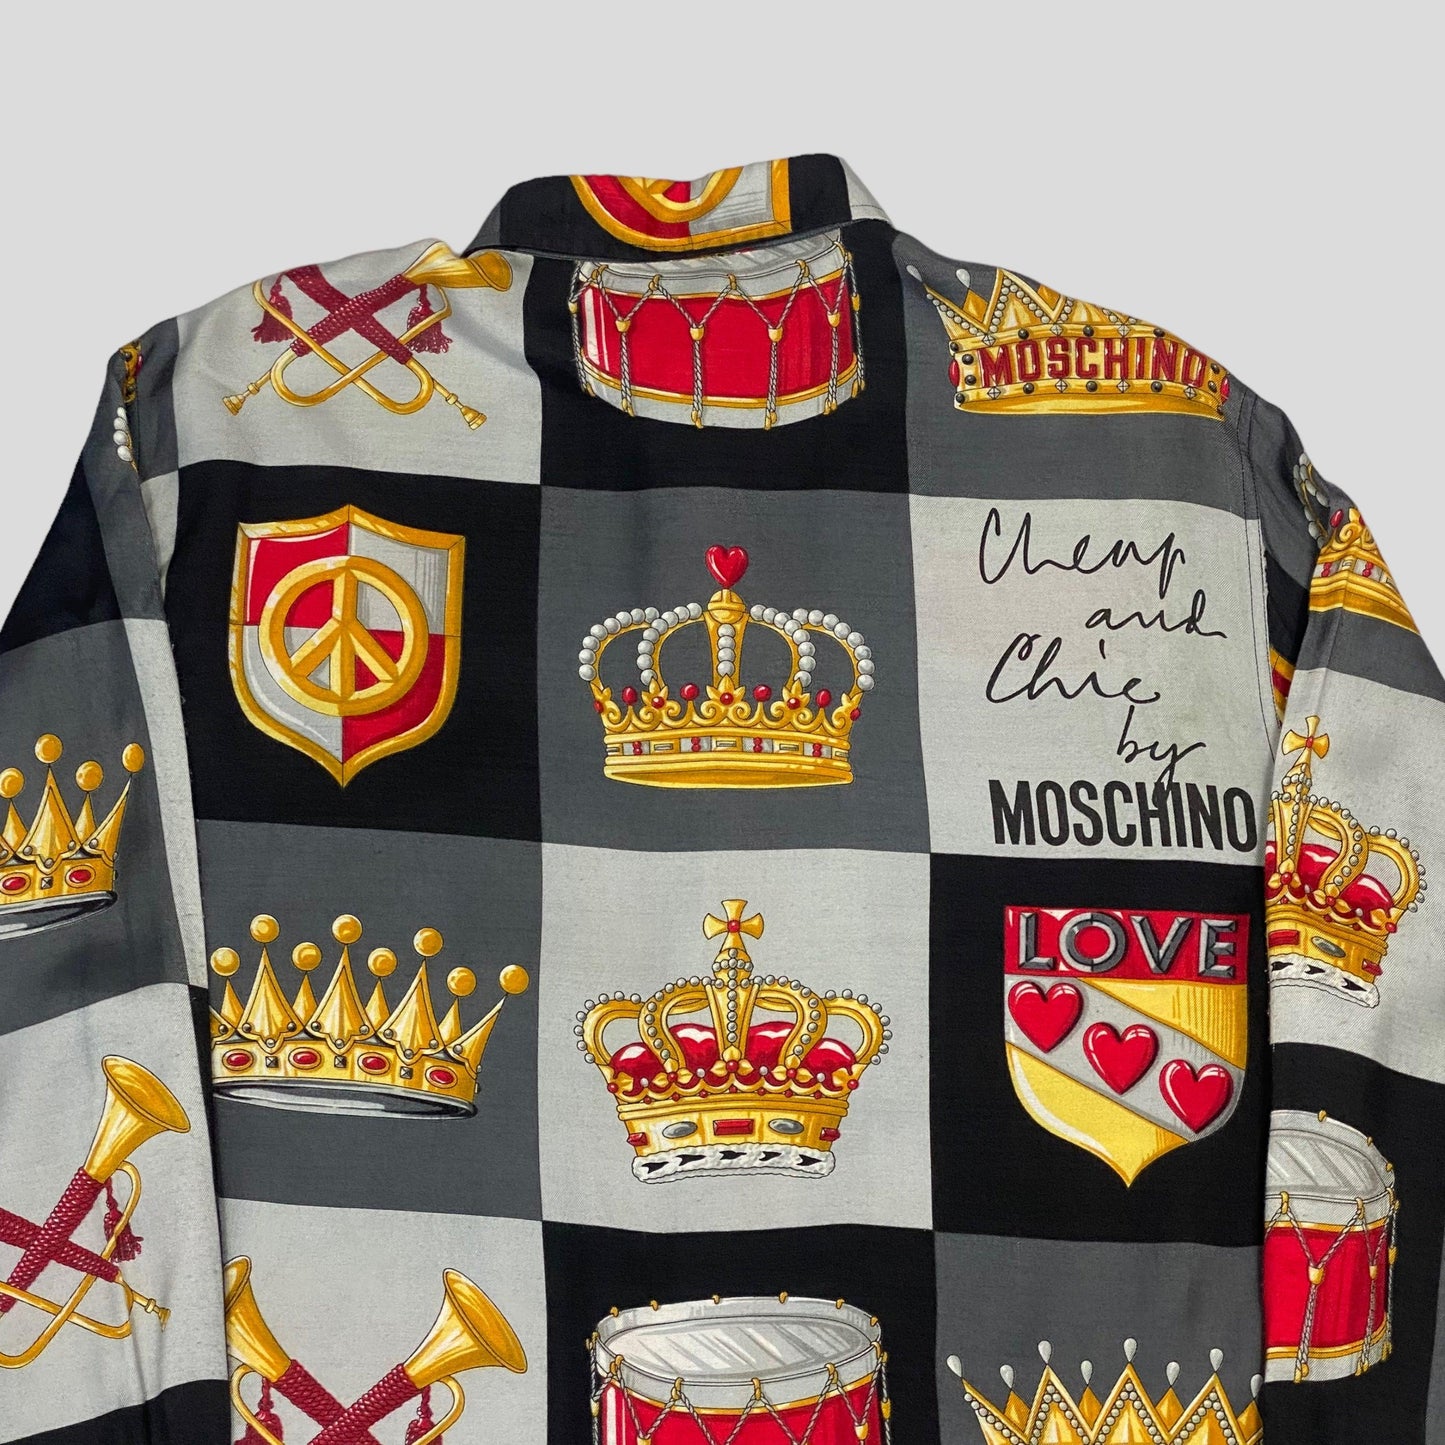 Moschino Cheap and Chic 1996/97 Royalty Print Shirt - M/L - Known Source